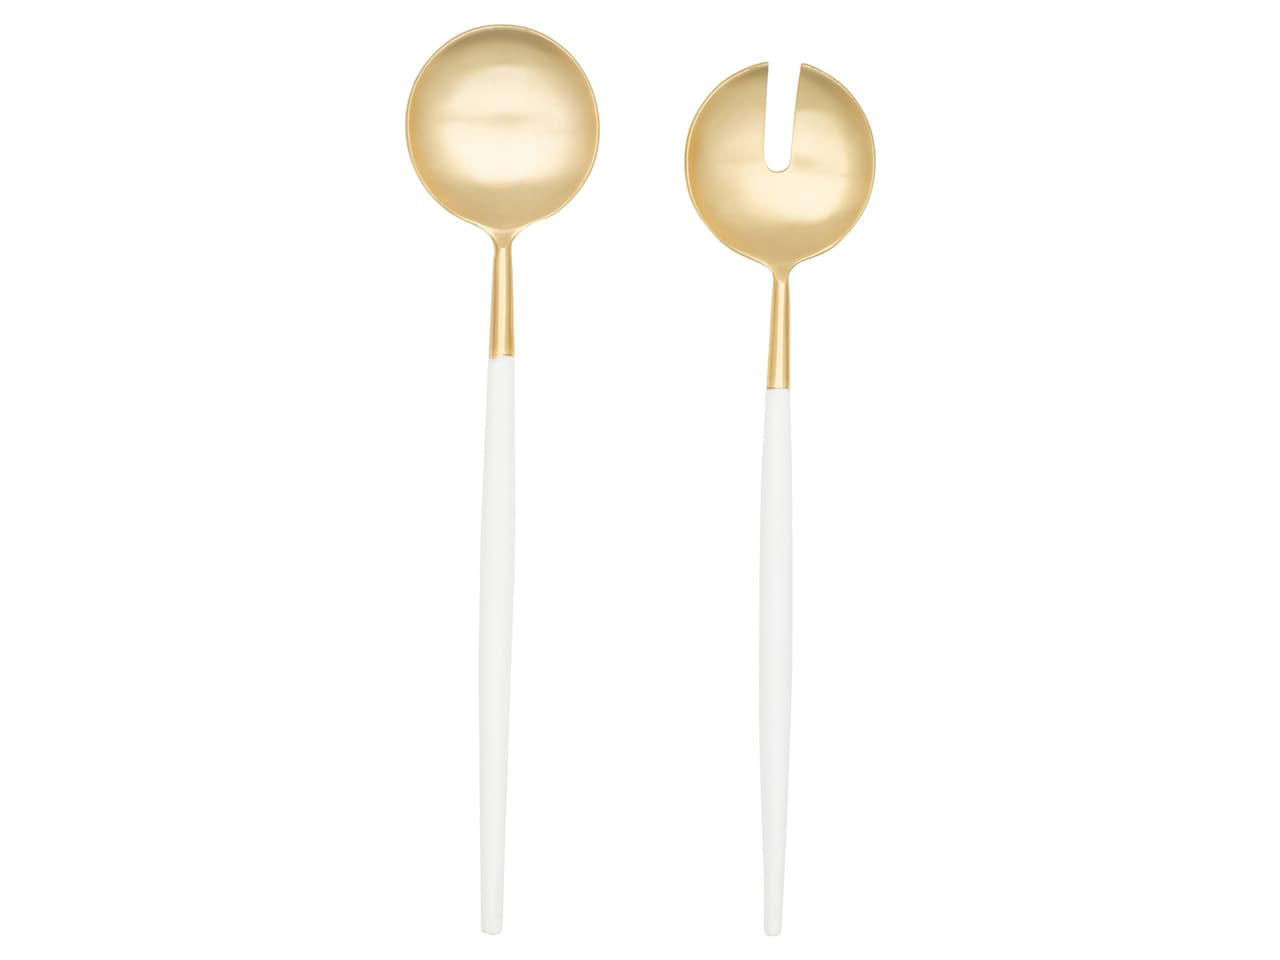 White and gold serving set from David Shaw for outdoor entertaining.